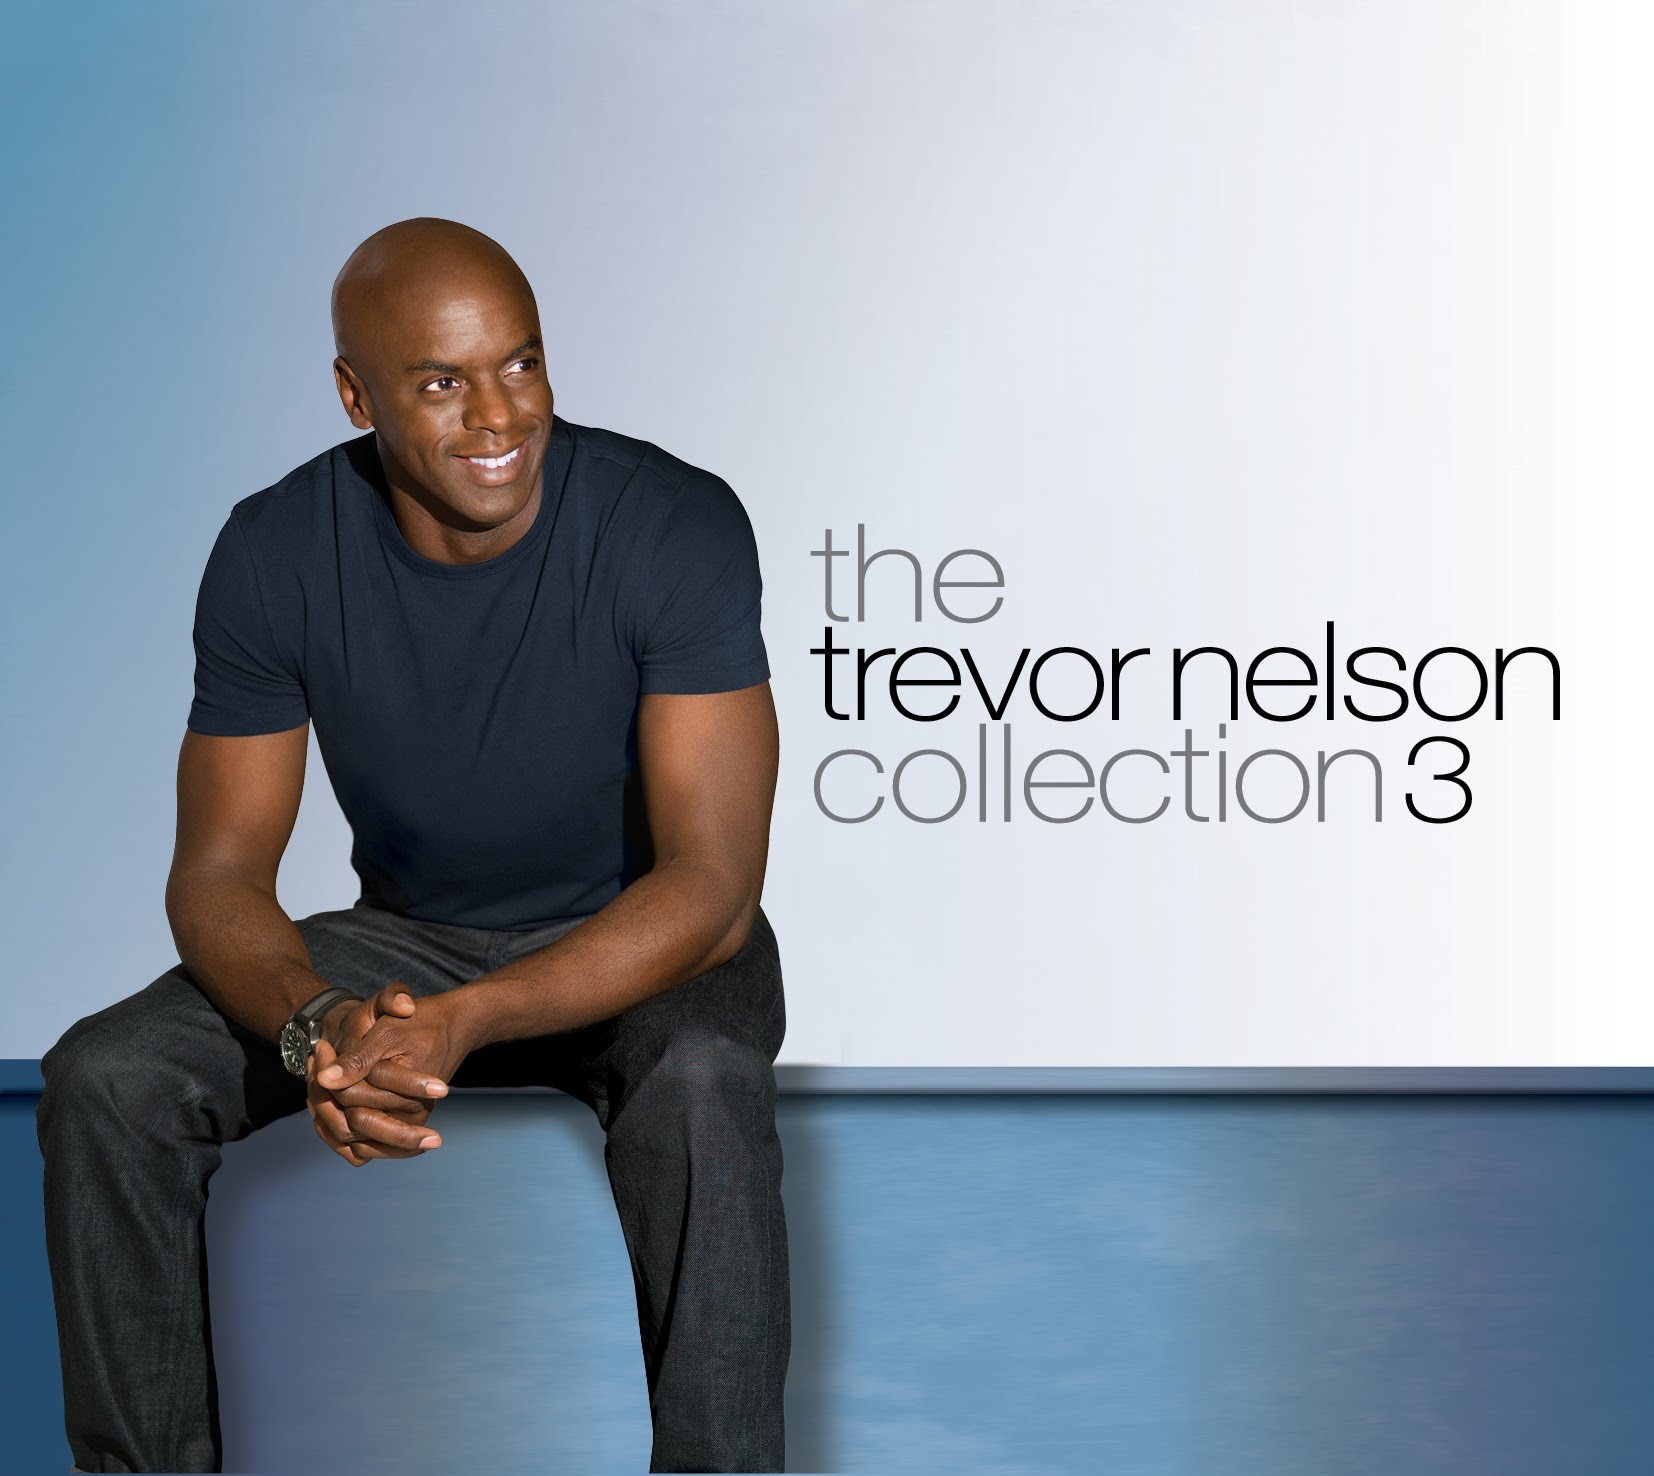 THE TREVOR NELSON COLLECTION 3 cover art